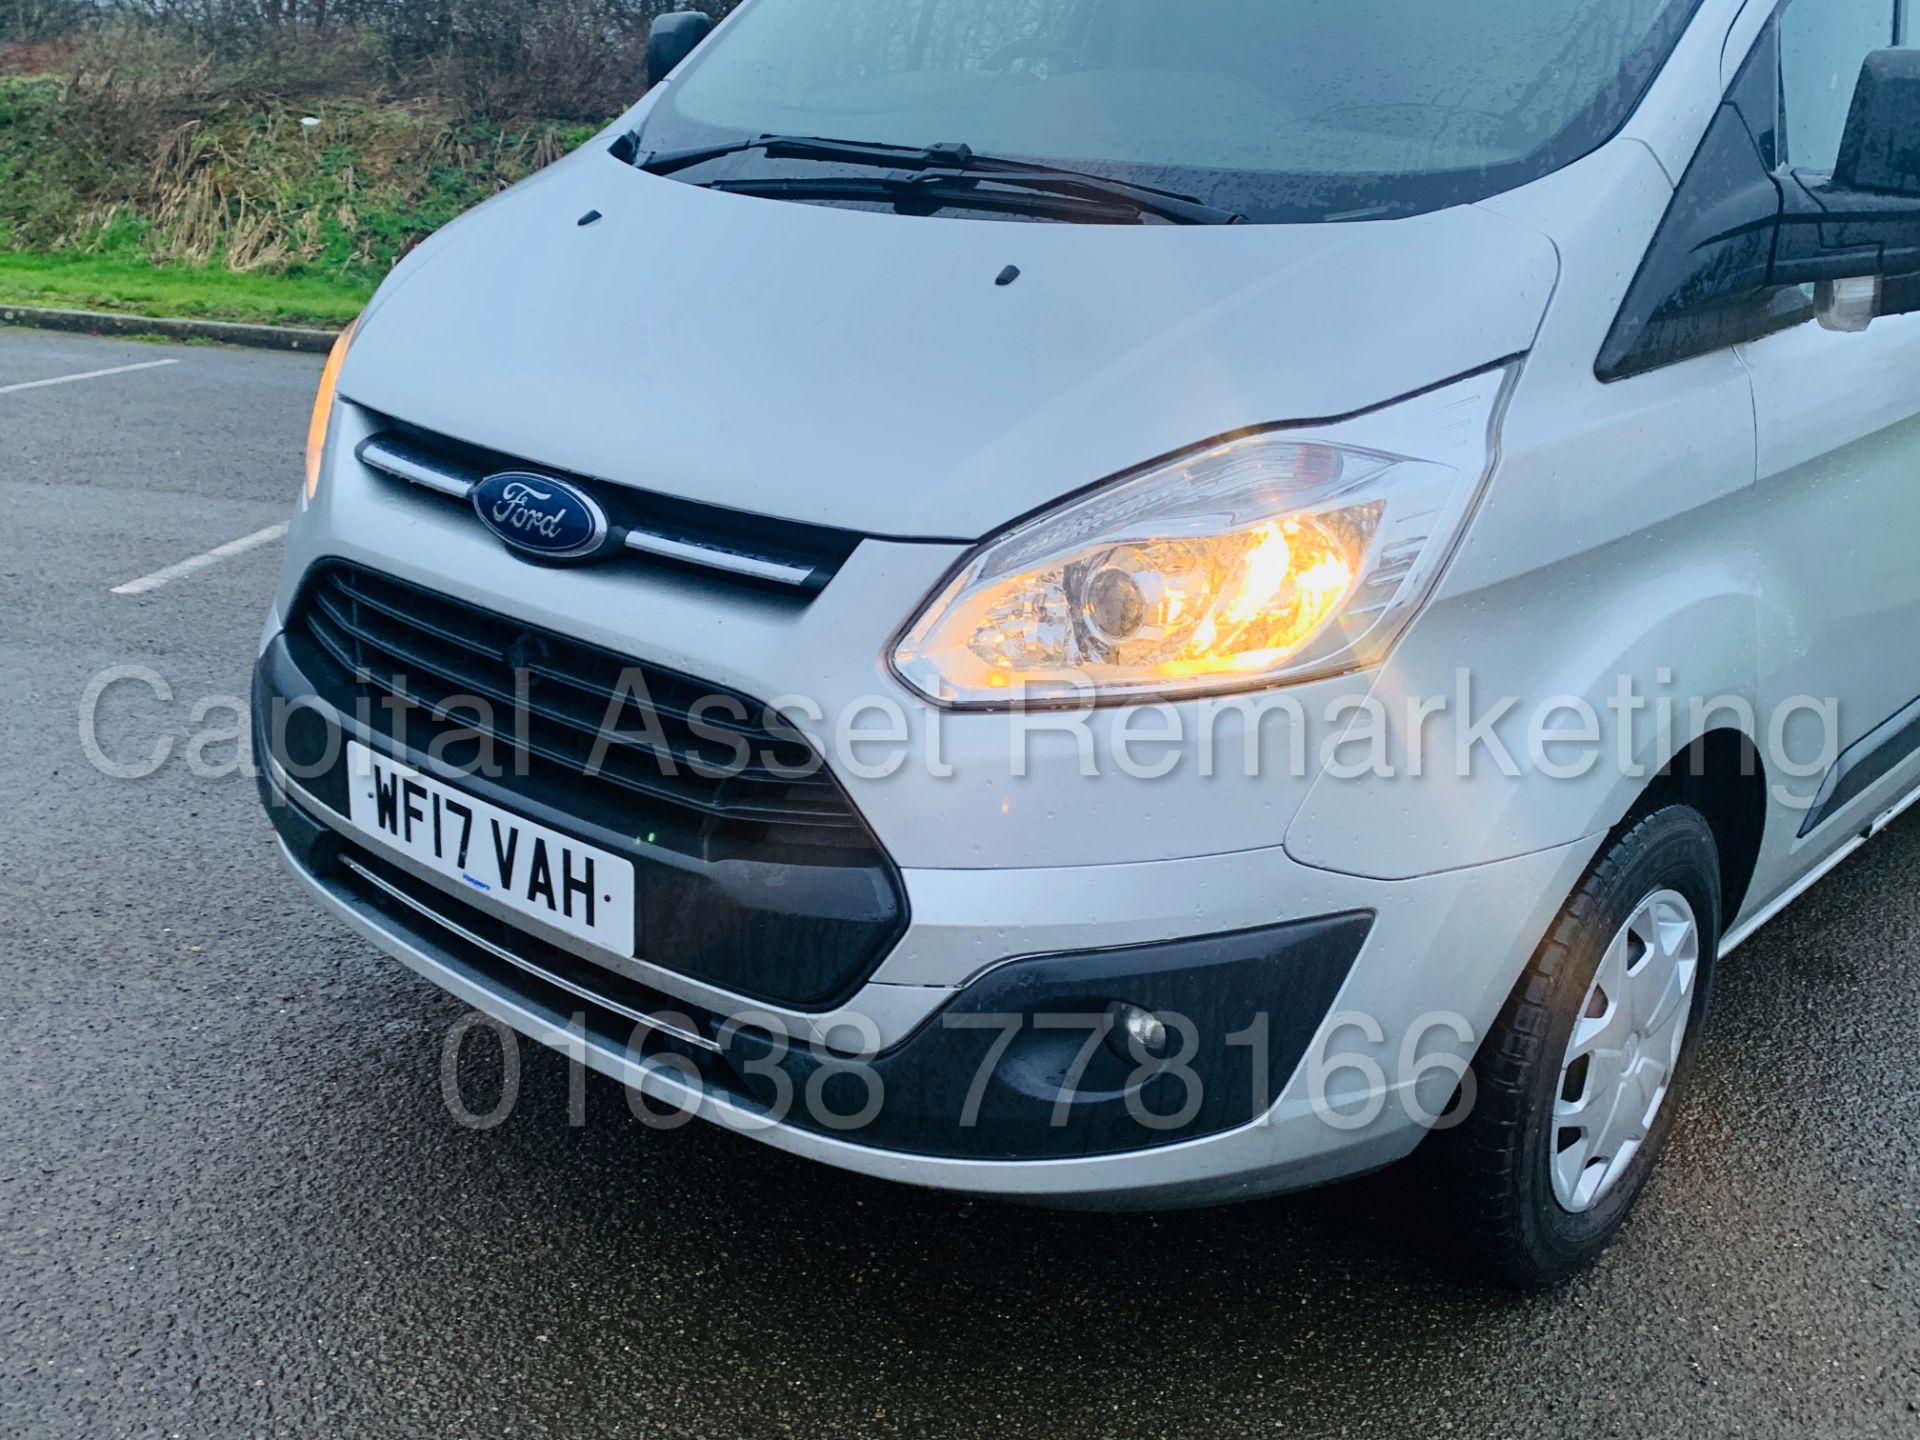 FORD TRANSIT *TREND EDITION* 290 SWB (2017 - EURO 6 / AD-BLUE) '2.0 TDCI - 130 BHP - 6 SPEED' - Image 14 of 41